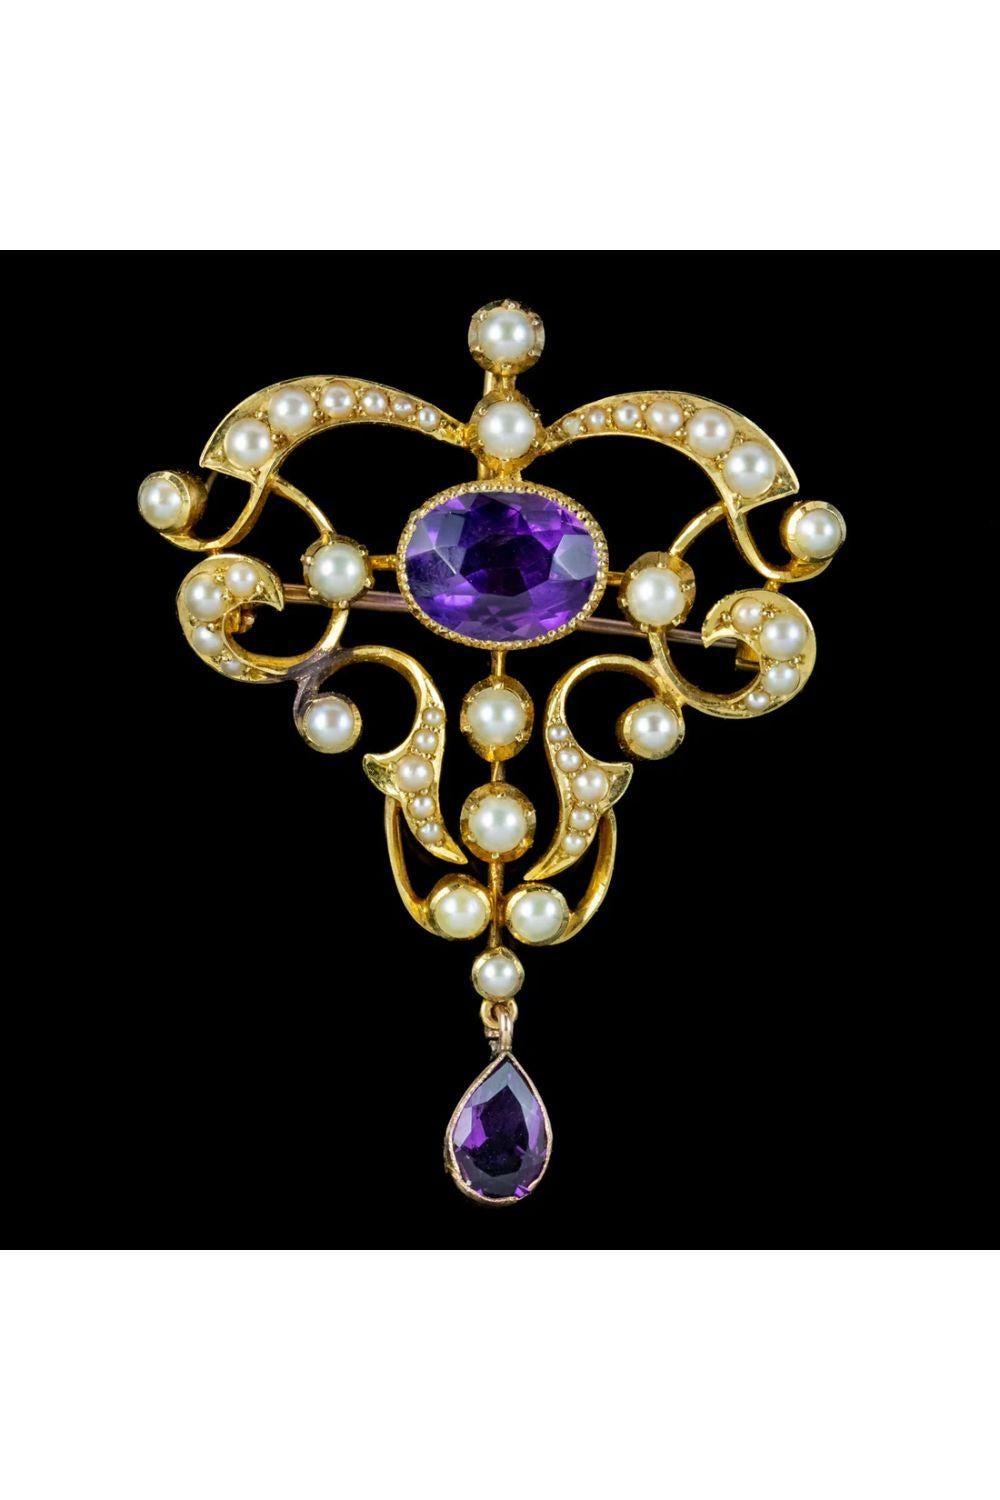 A fabulous antique Art Nouveau brooch from the late 19th Century decorated with gleaming, white pearls and two deep, purple amethysts weighing approx. 2.5ct in the centre and 0.60ct at the bottom. 

The open-work gallery is made up of flowing curves